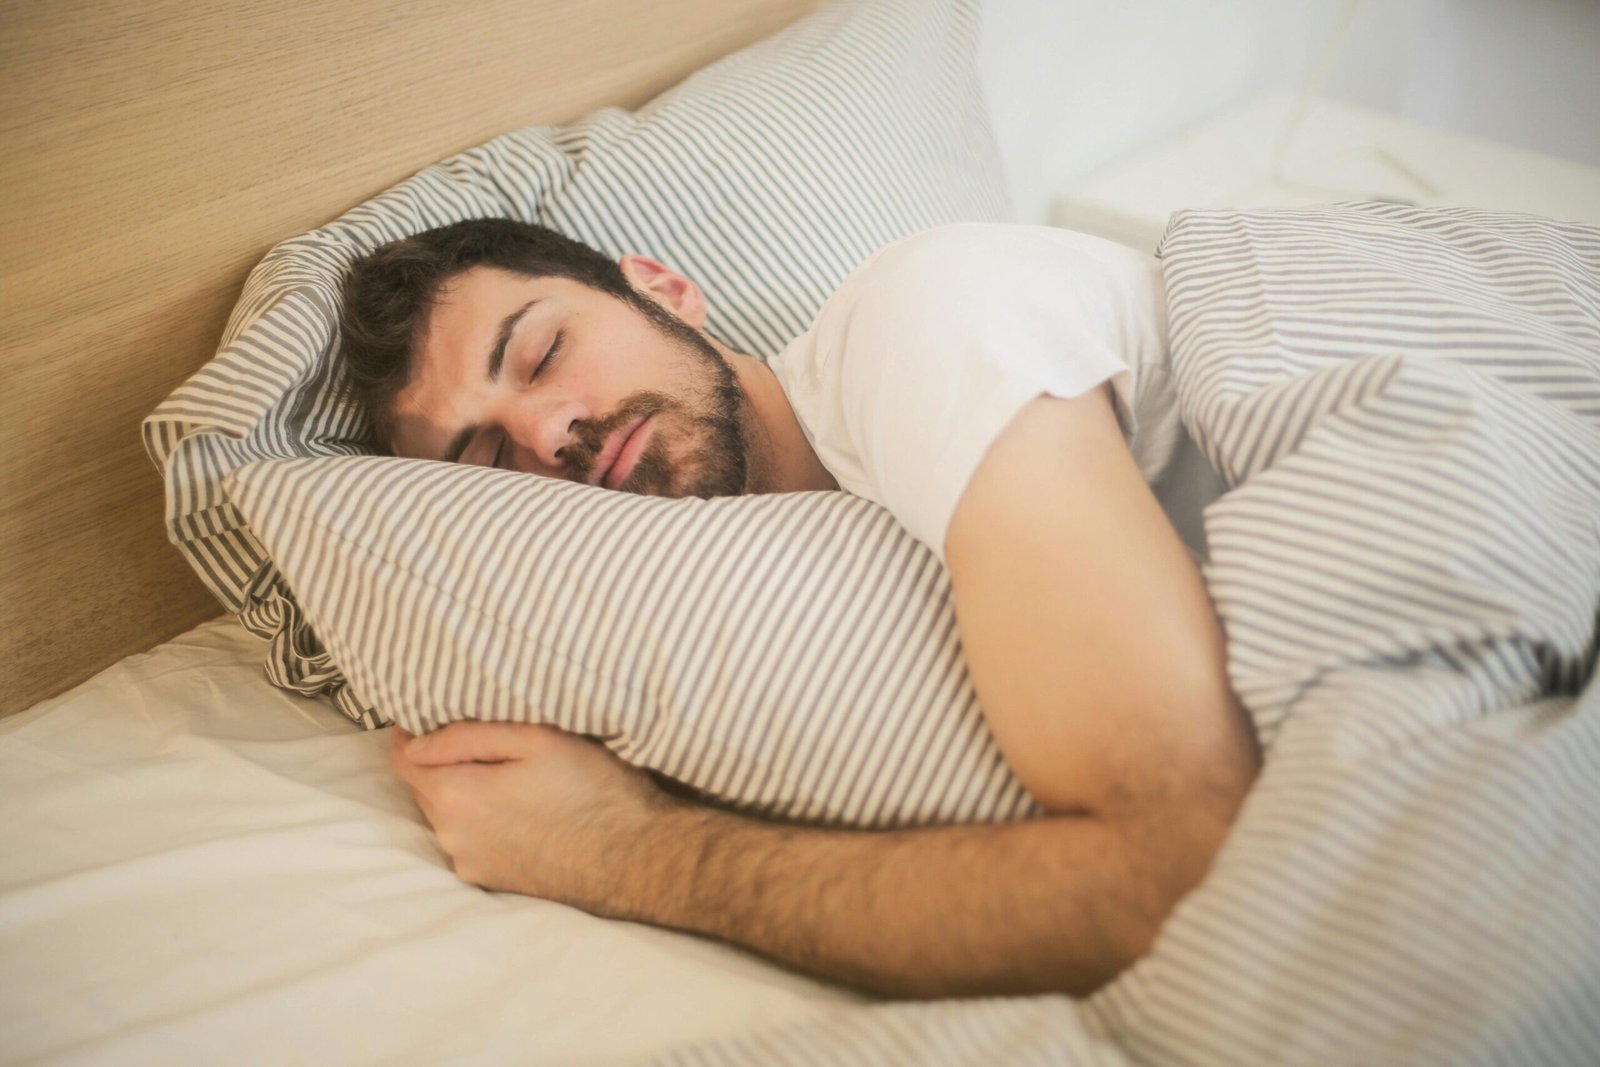 Adequate sleep important for your heart health, says physician